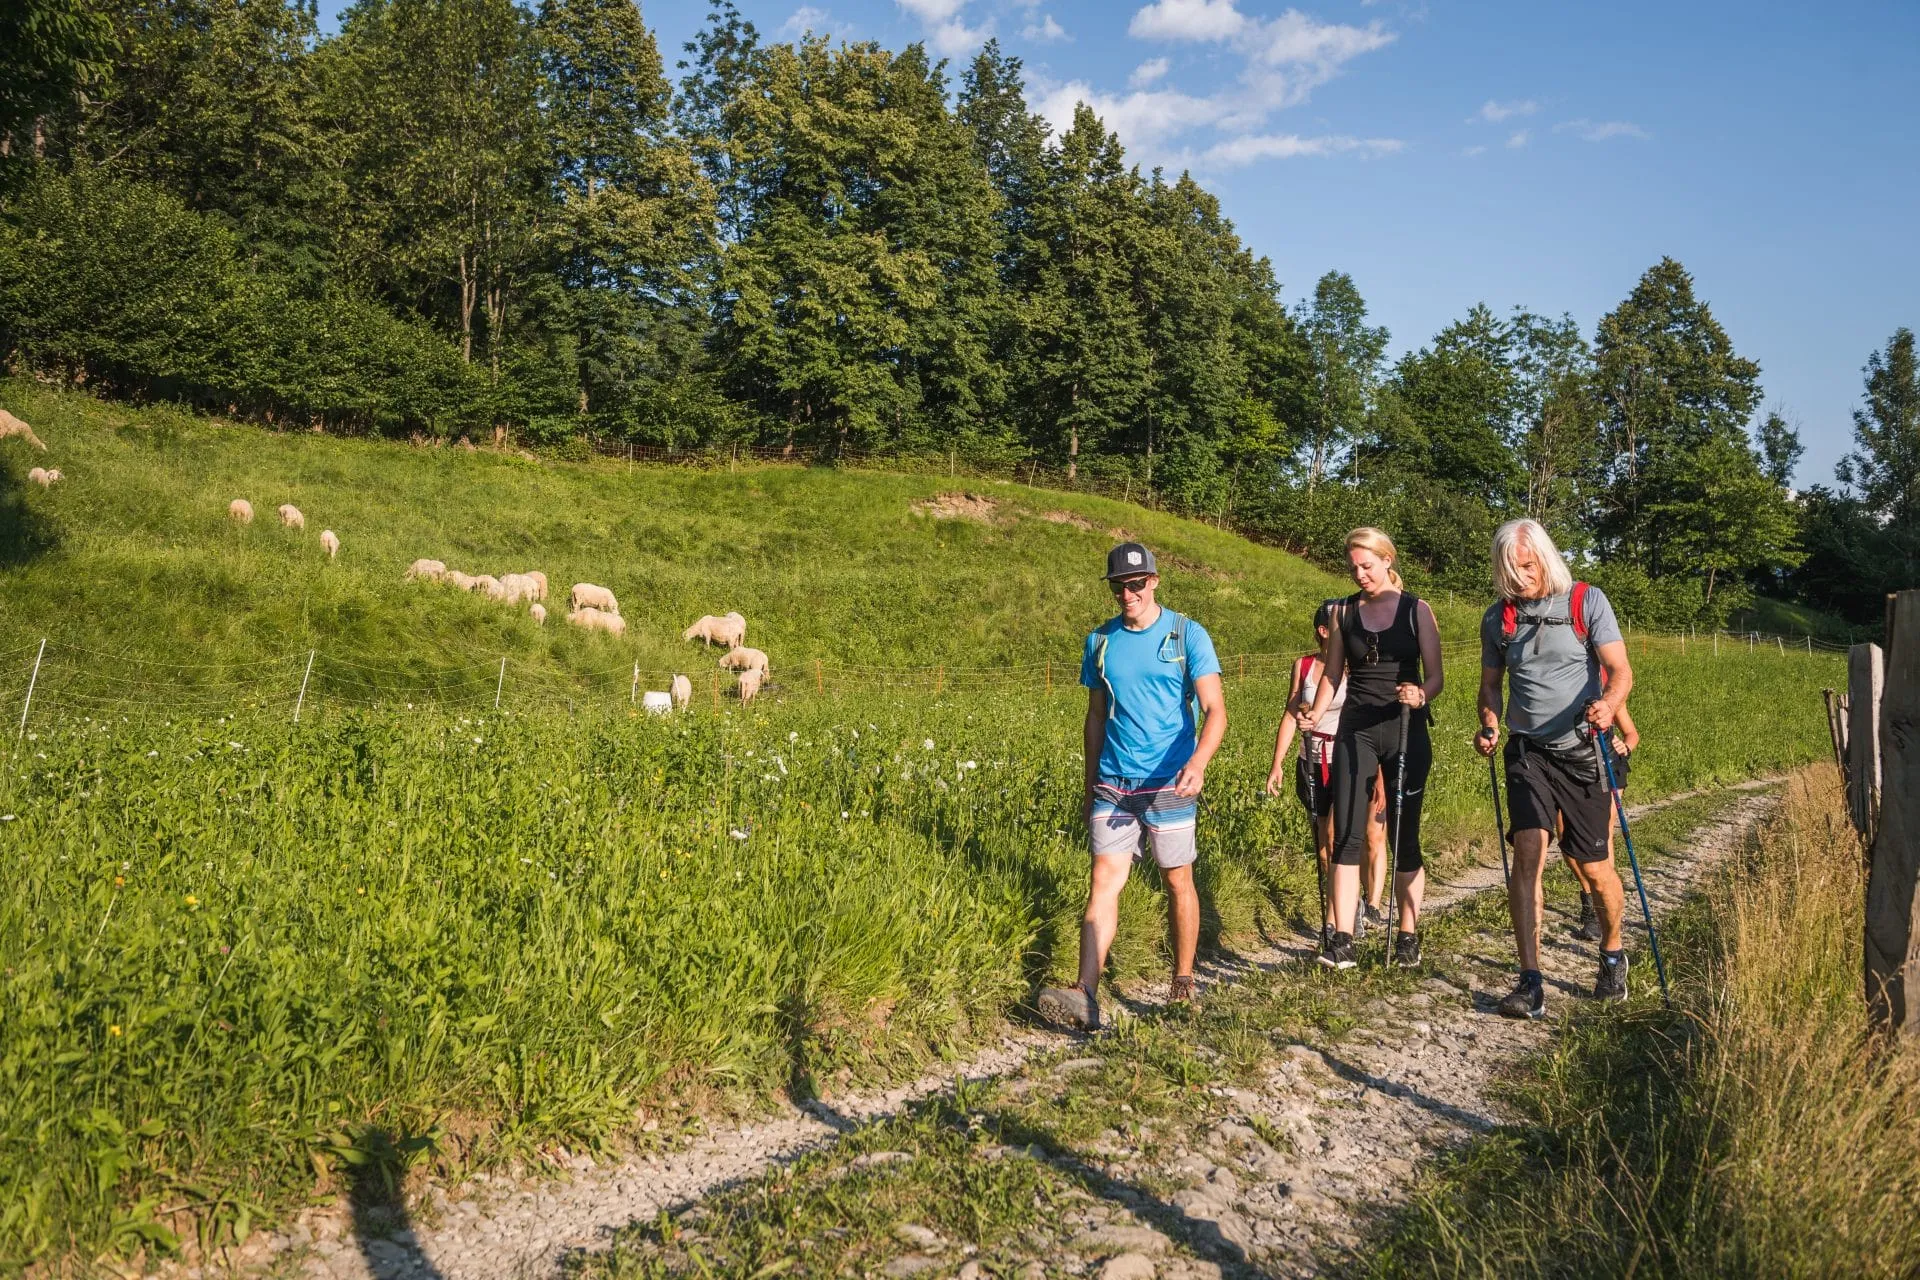 Hikers in Slovenia